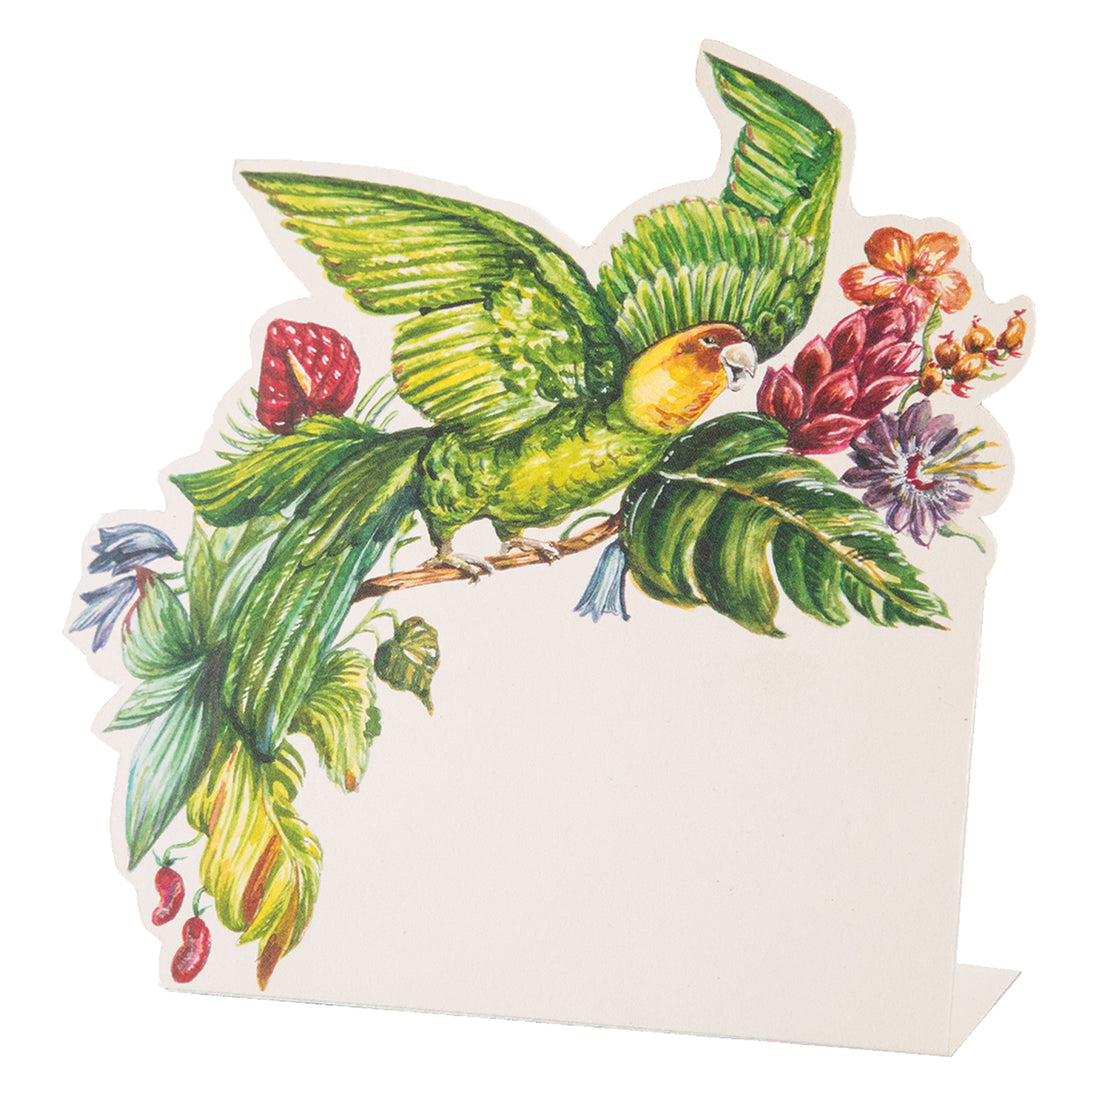 A die-cut freestanding place card featuring a vibrant parrot surrounded by tropical foliage adorning the top and left edges of the card, with an open white area in the lower right for personalization.